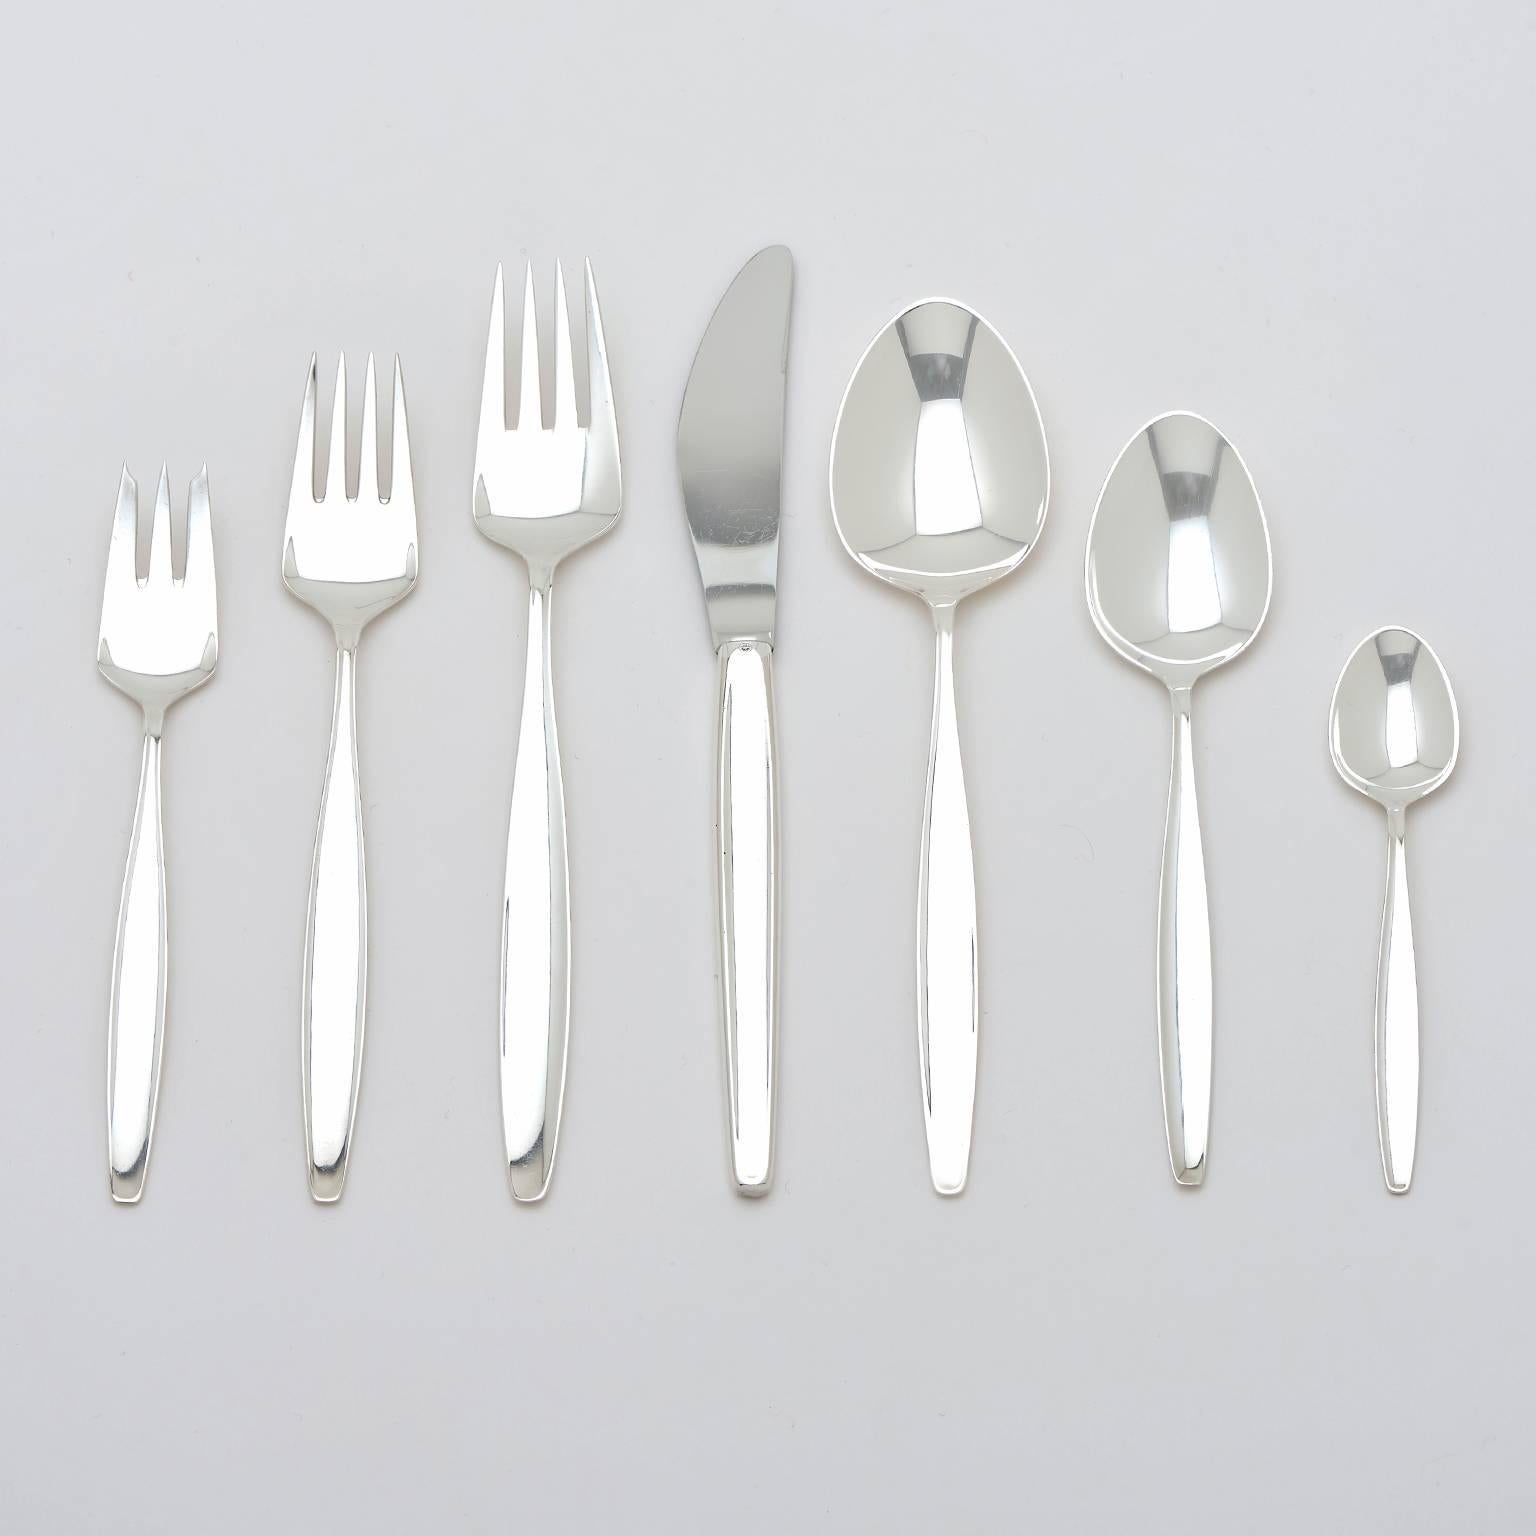 Circa 1950s, Sterling, Georg Jensen, Denmark.  Cypress pattern, by Tias Eckhoff (circa 1954).  This sleekly sophisticated set of Georg Jensen “Cypress” flatware complements the style of any décor or table service. At 92 pieces, this service for 12